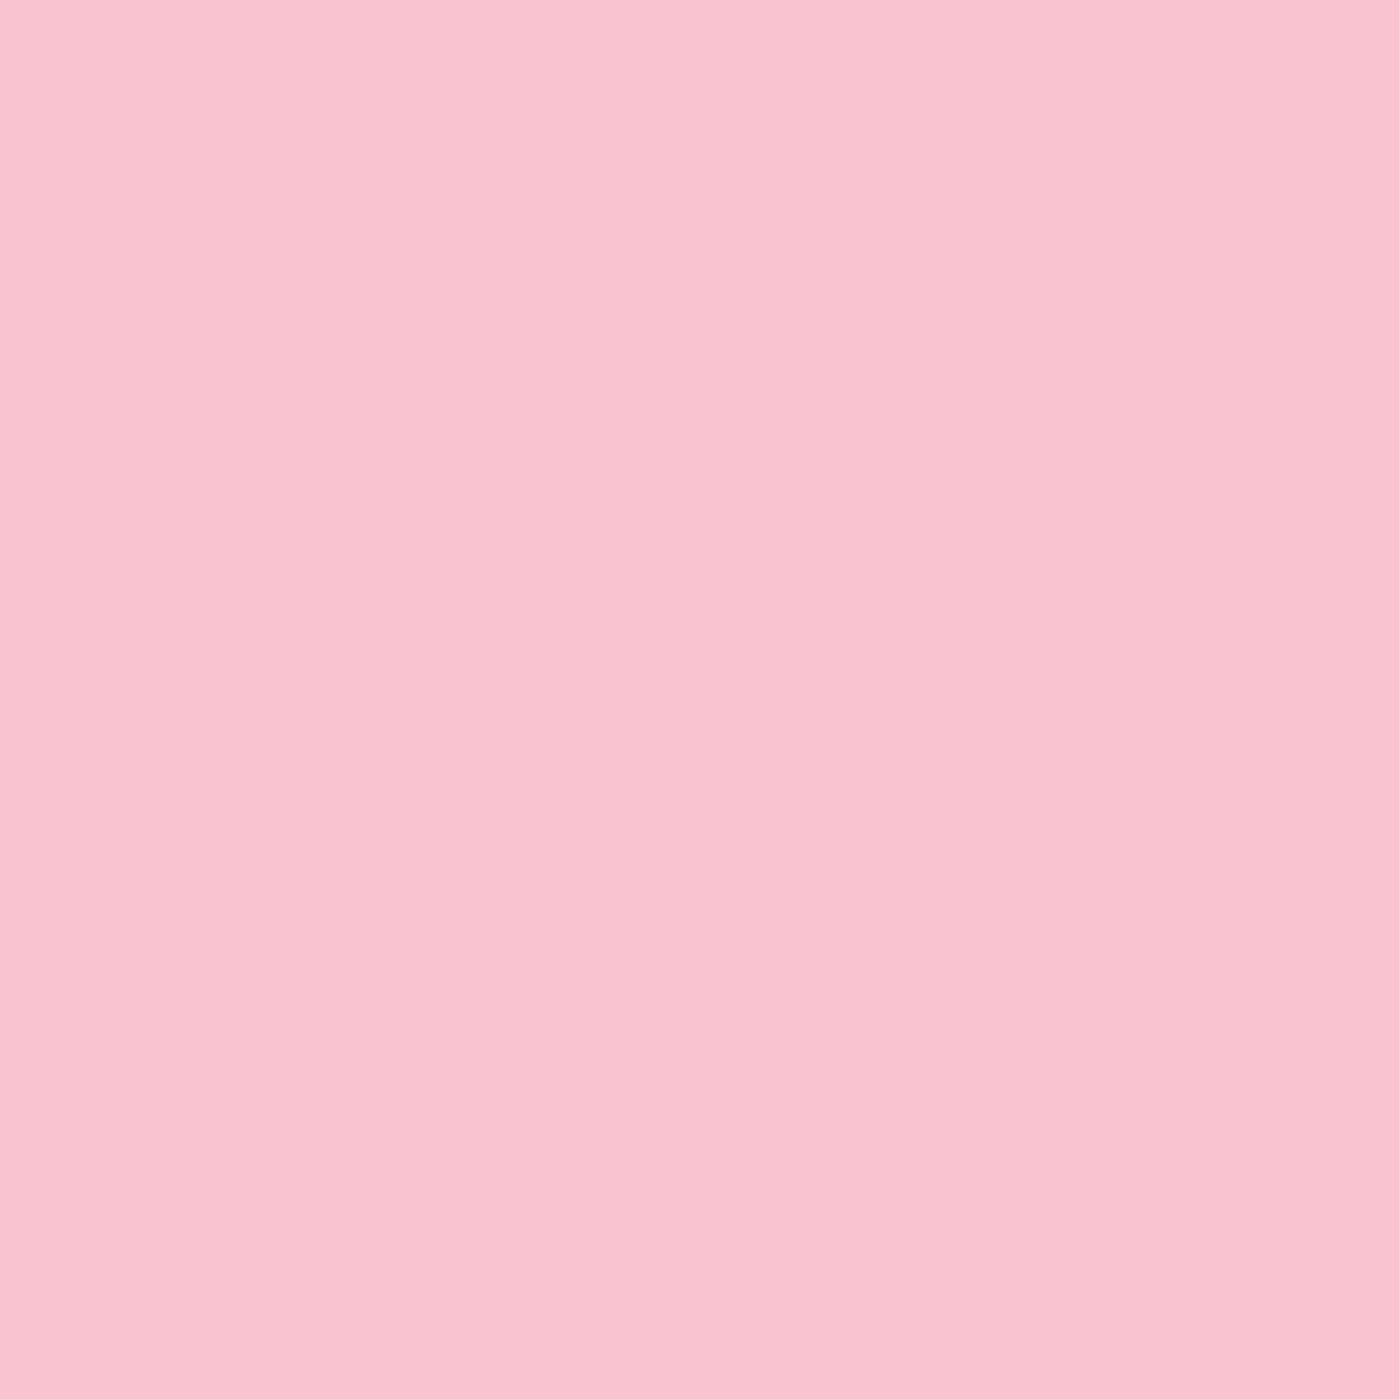 Amscan Striking Solid Color Gift Wrap - Pink, 5' x 30"